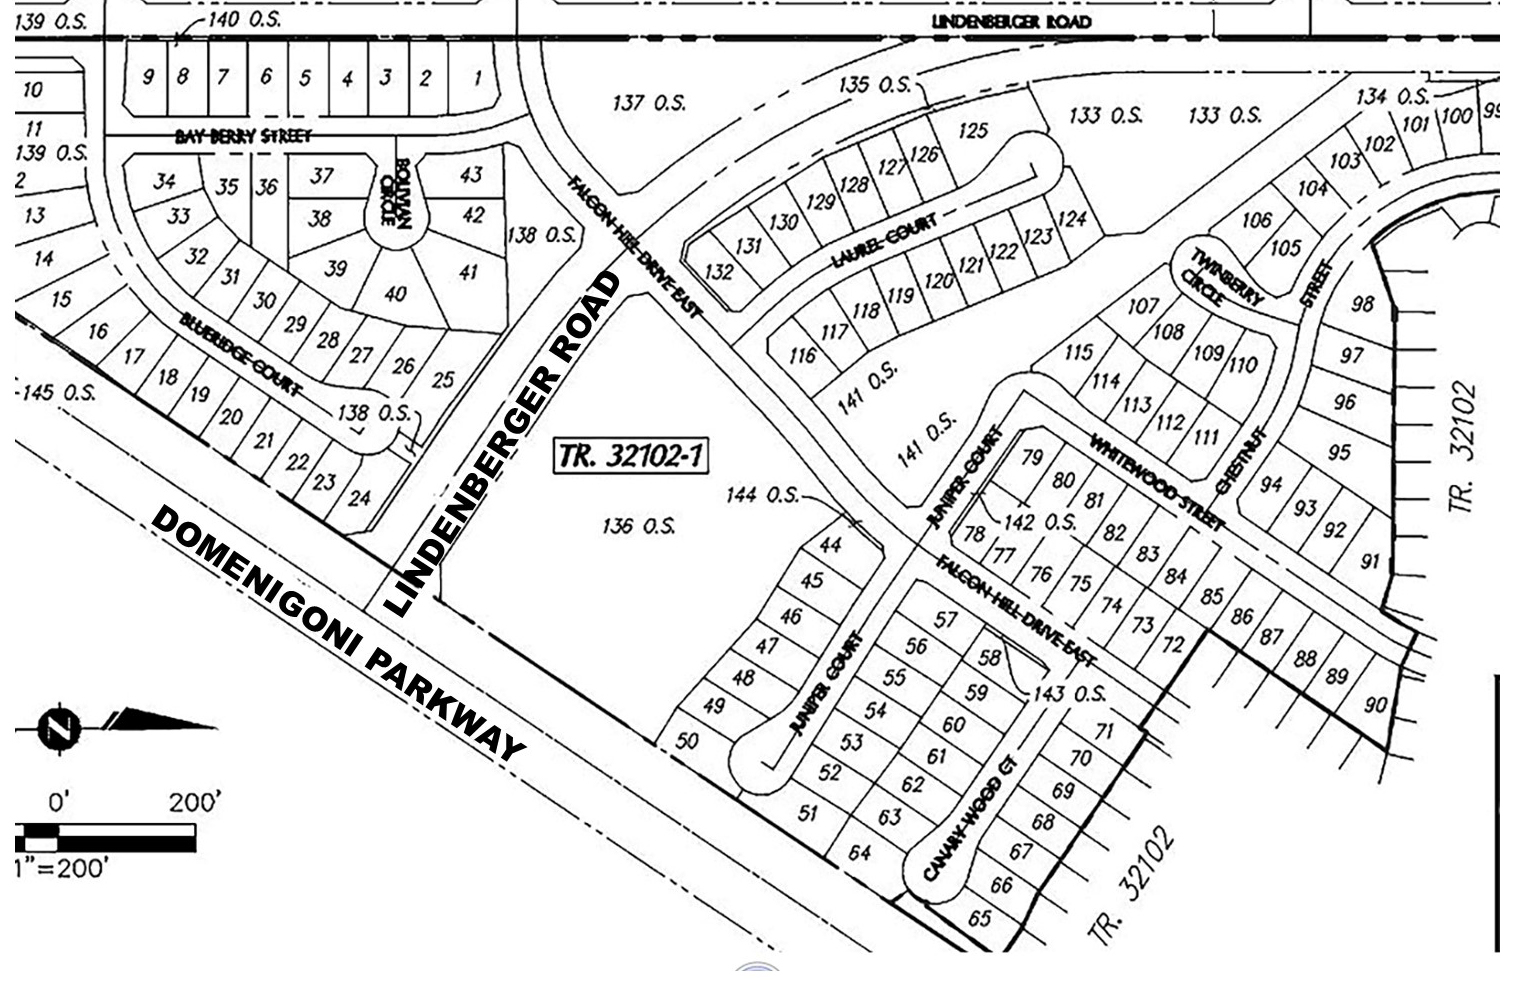 City approves tract map, financing for Menifee Village project Menifee 24/7